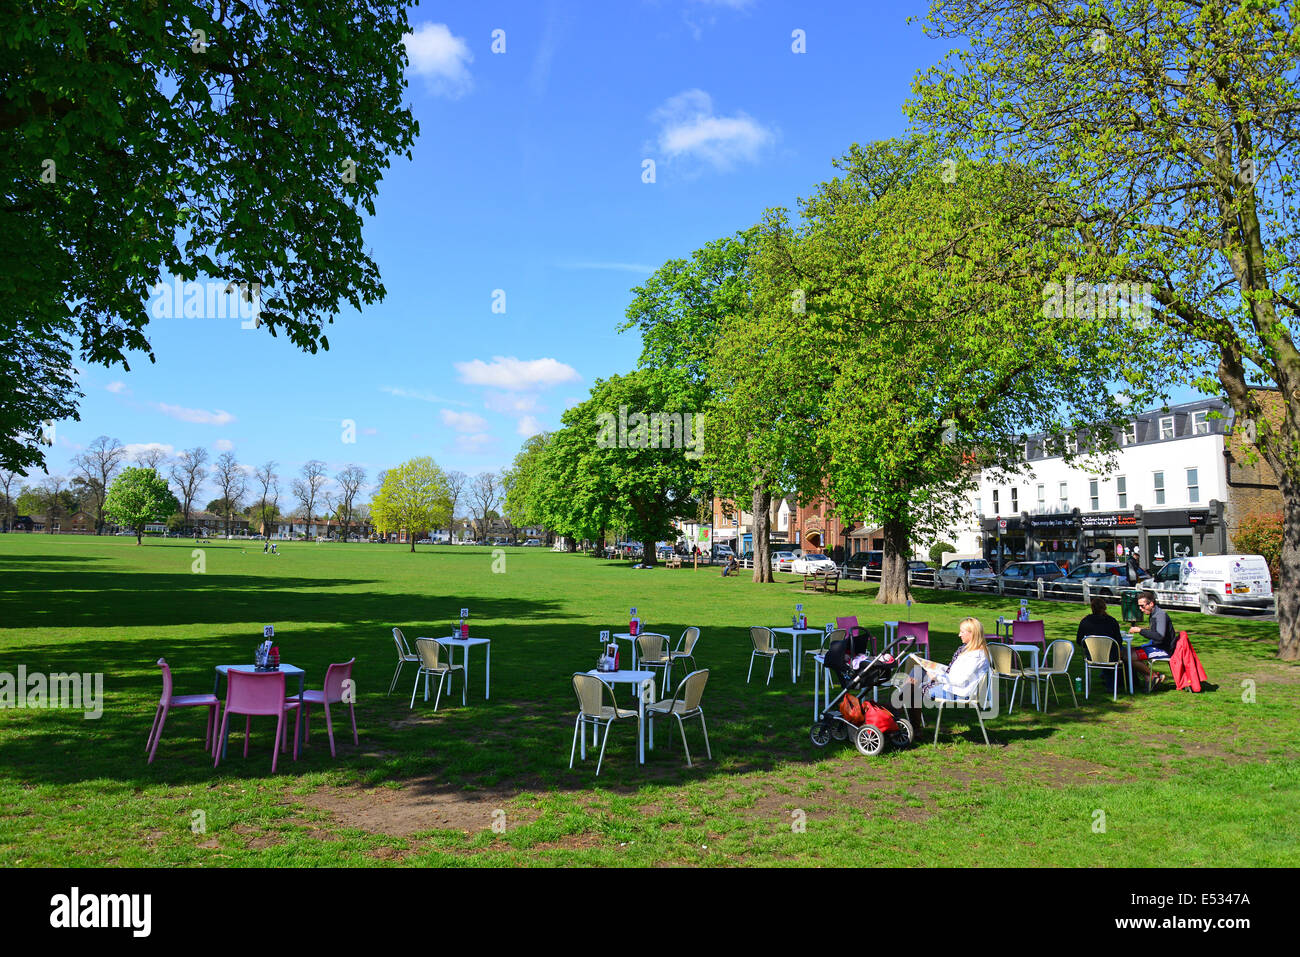 Outdoor cafe on The Green, Twickenham, London Borough of Richmond upon Thames, Greater London, England, United Kingdom Stock Photo